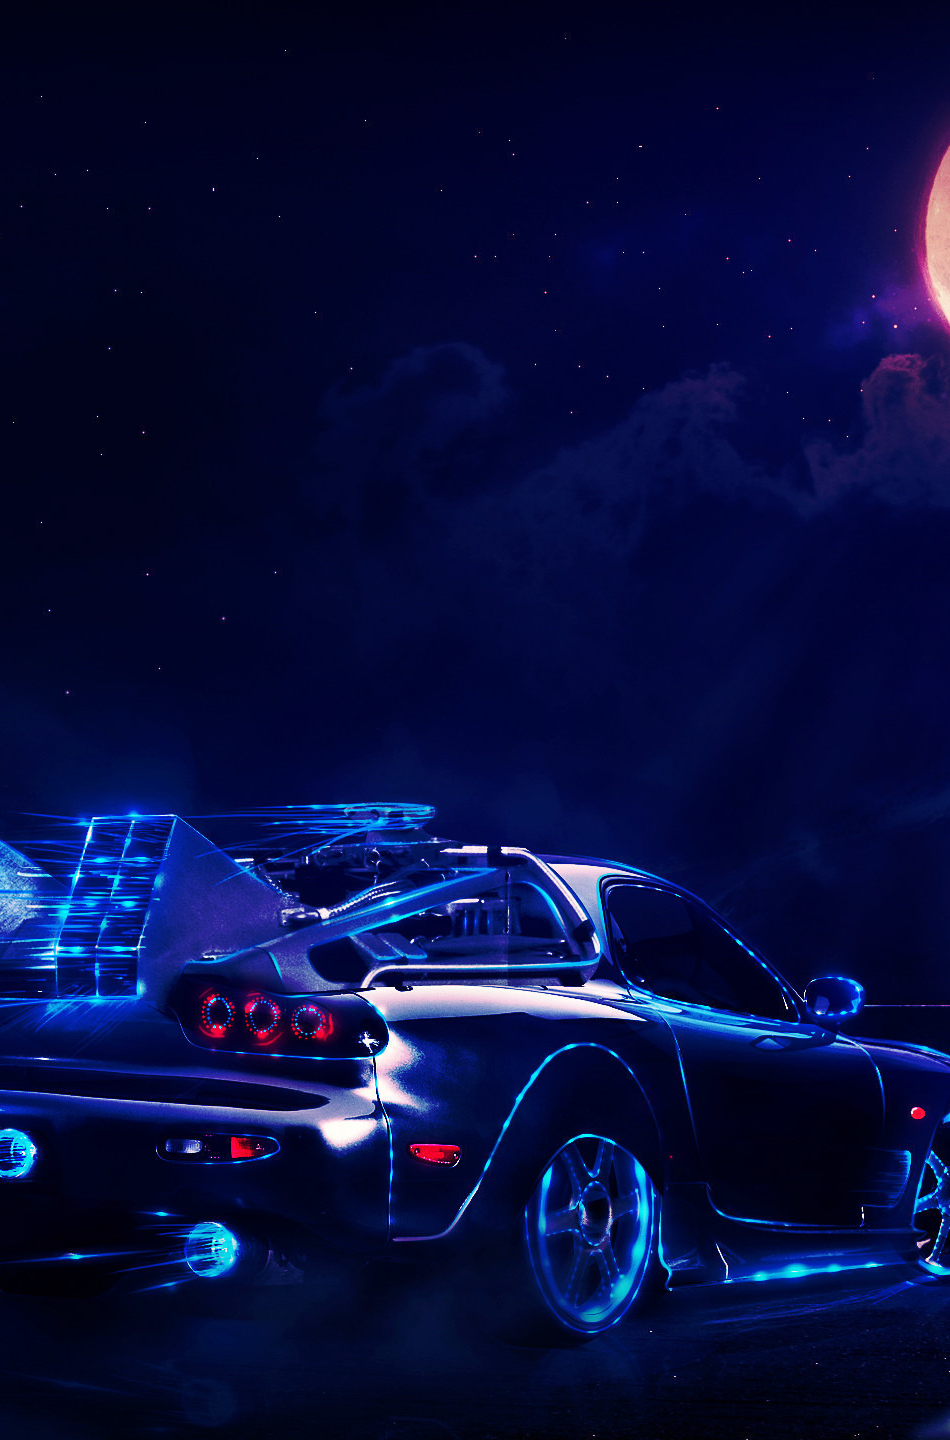 Download 950x1534 Wallpaper Mazda Rx 7 Car Dark Back To The Future Movie Art Iphone 950x1534 Hd Image Background 12